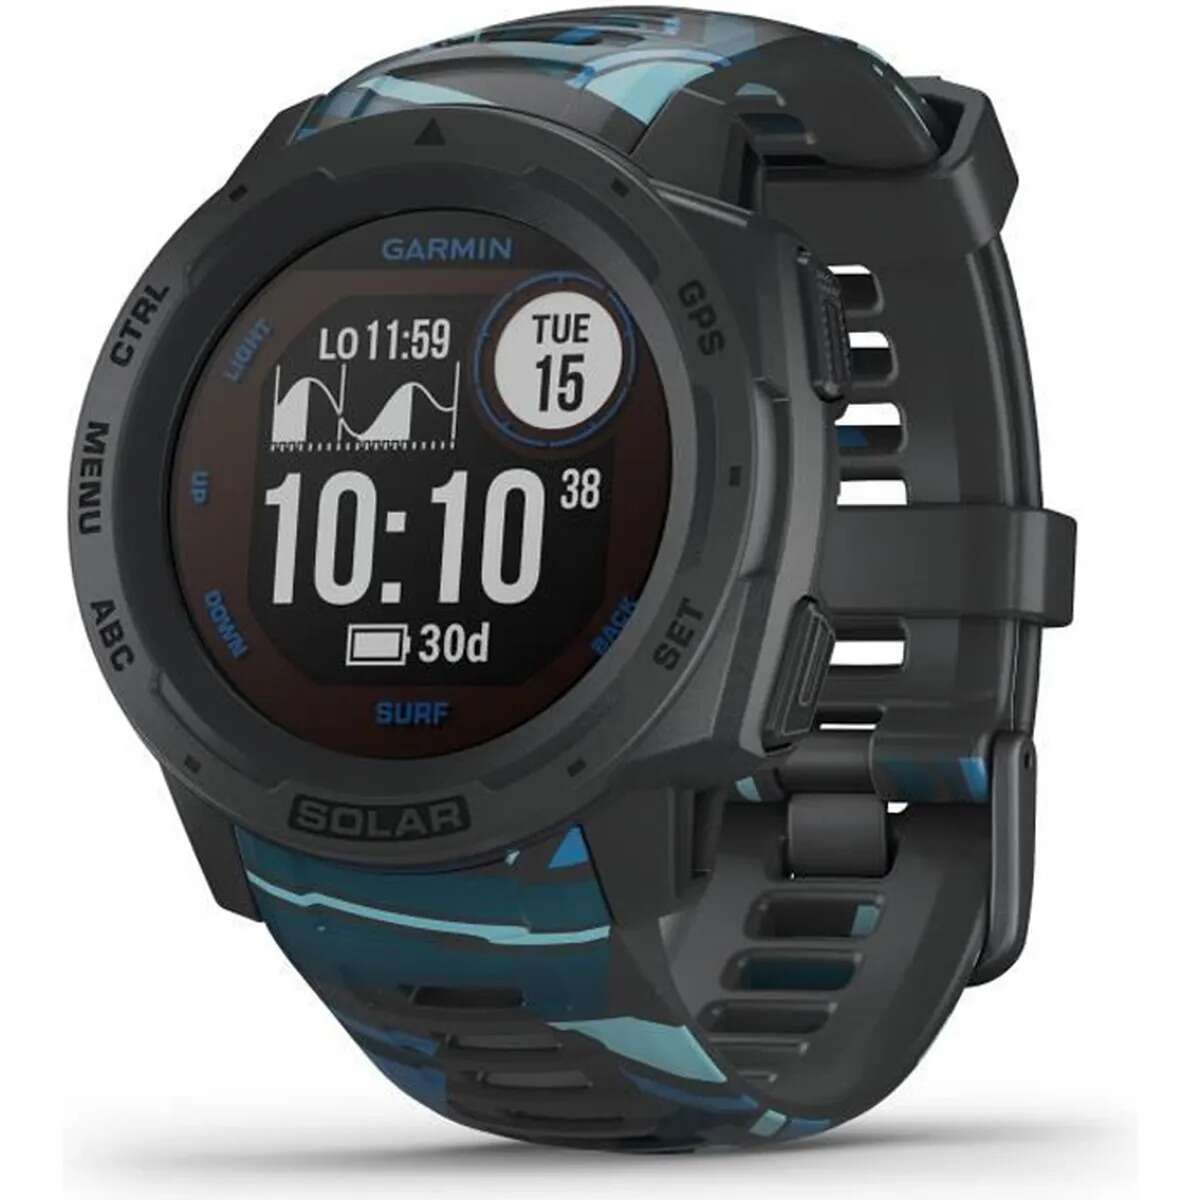 Treat yourself to the Garmin Instinct Solar Surf connected watch at a bargain price on Cdiscount